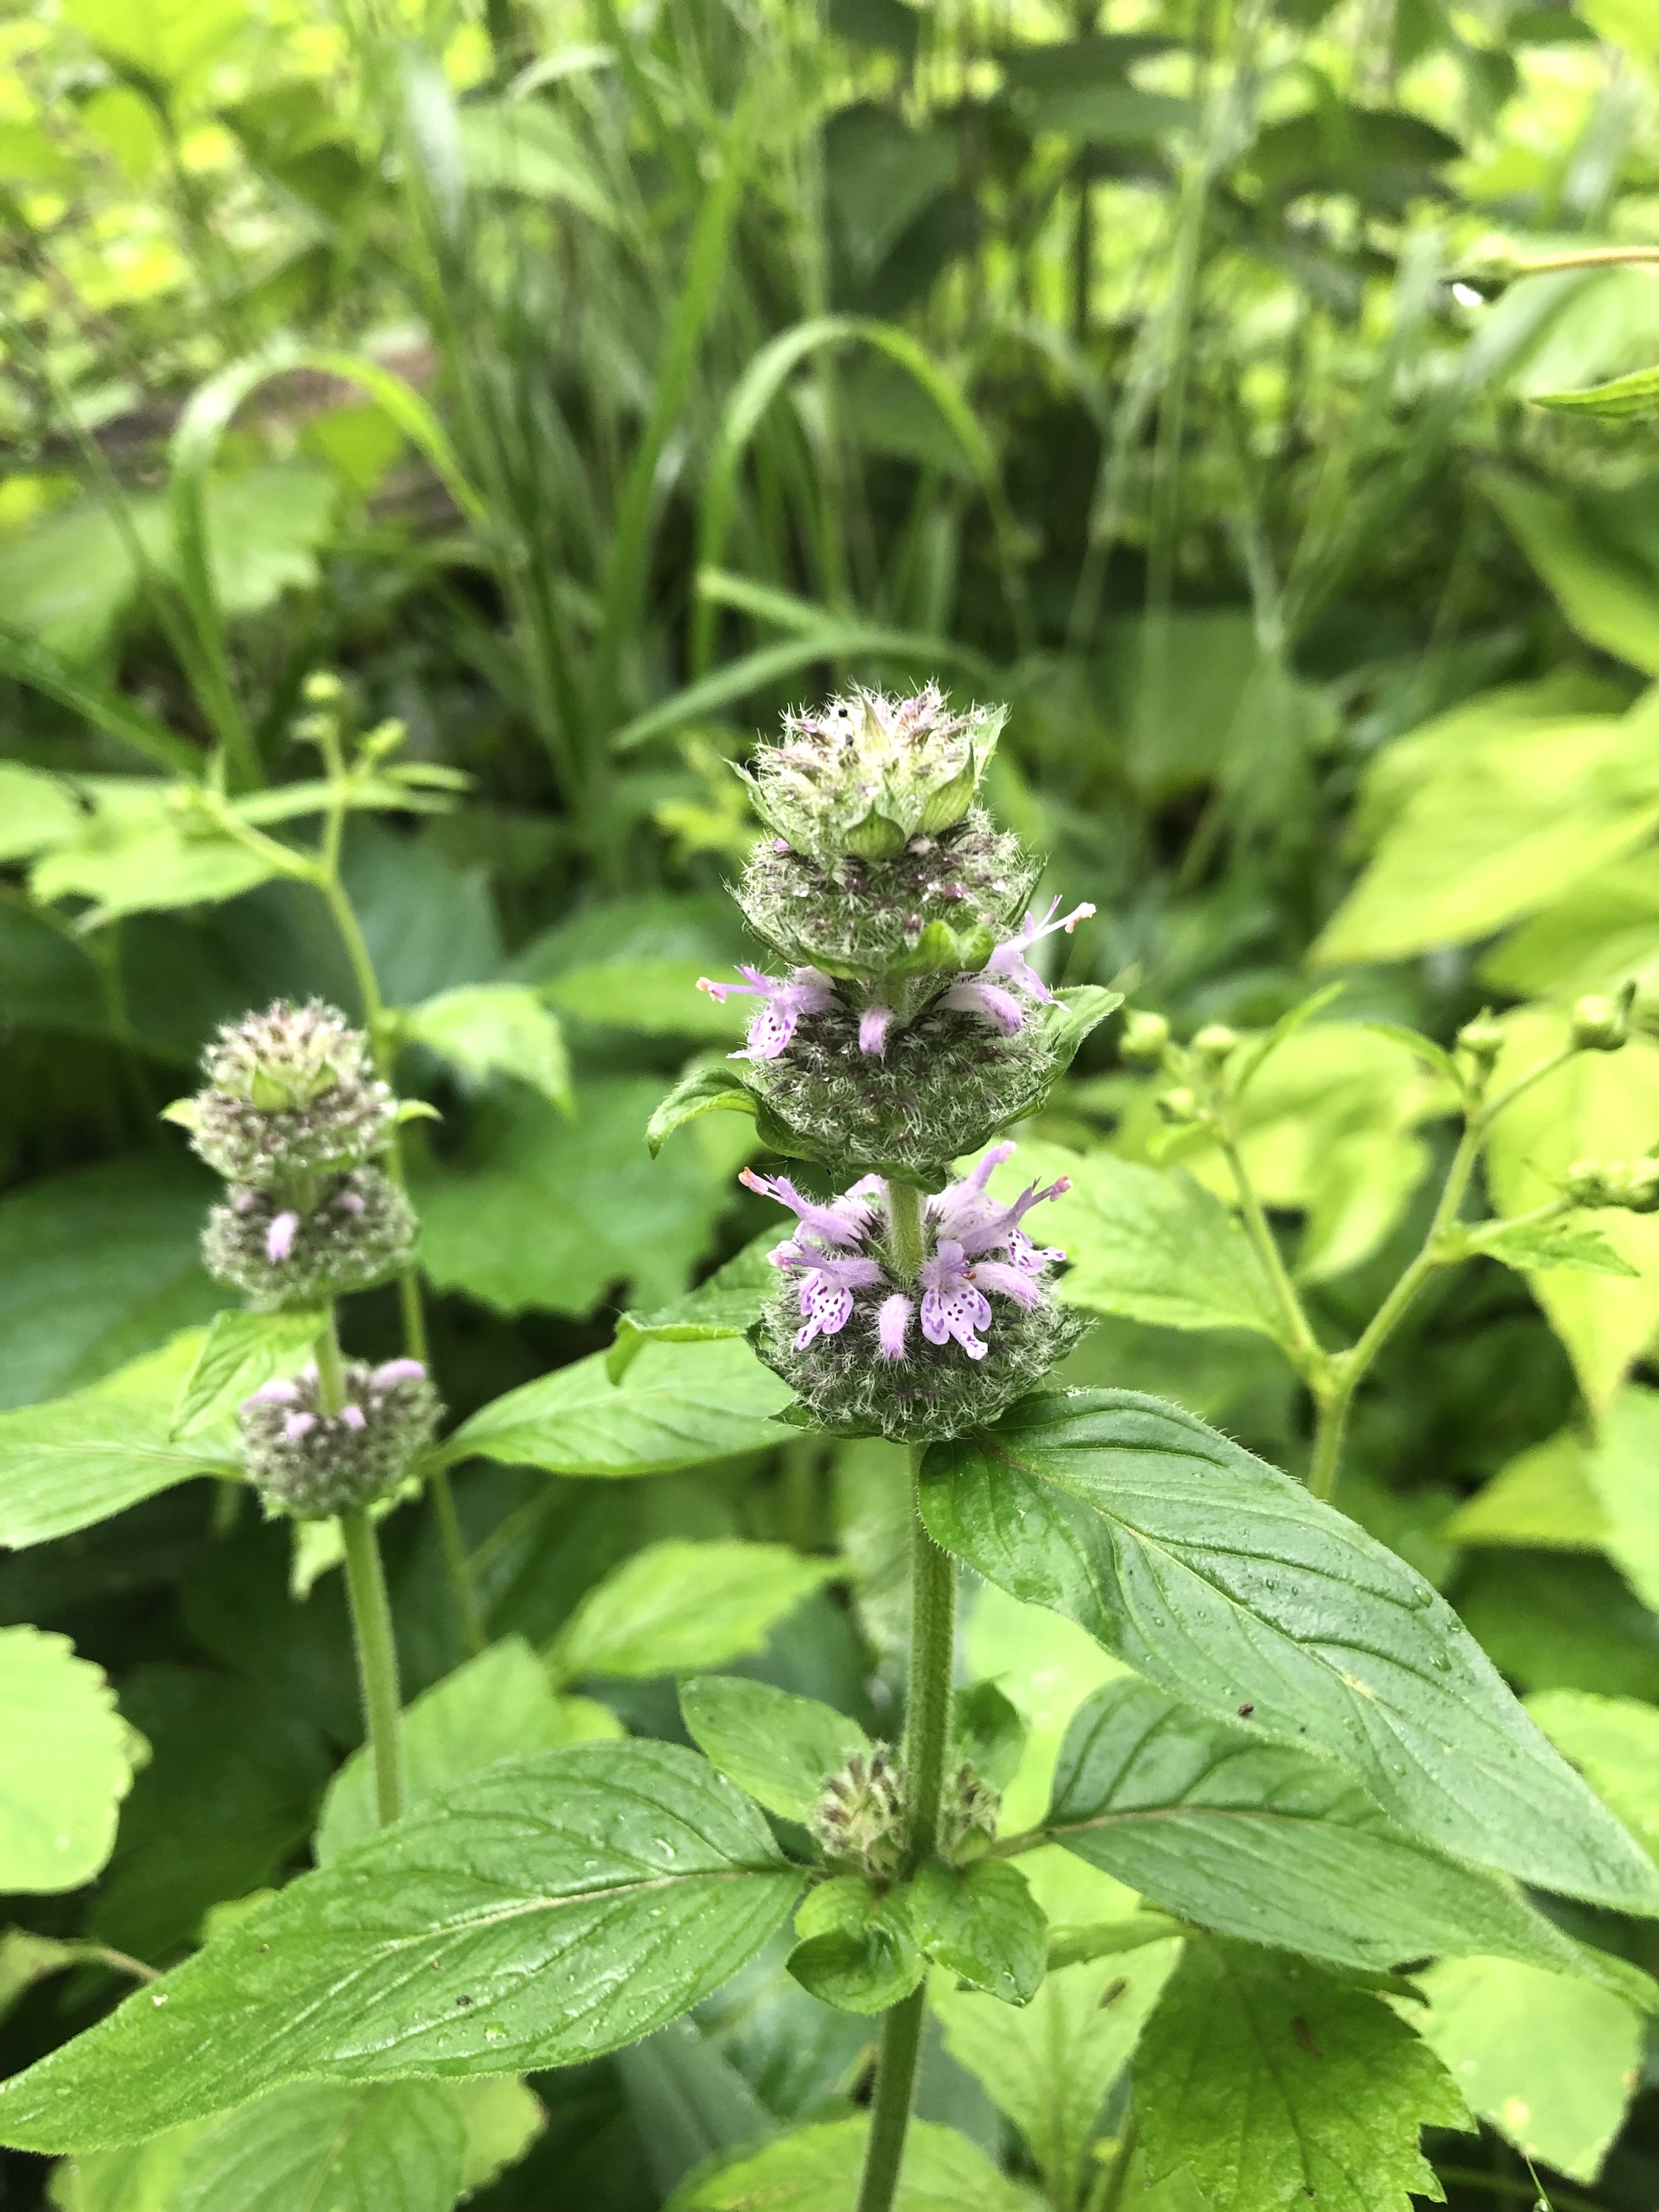 Downy Pagoda-plant near Council Ring in Oak Savana in Madison, Wisconsin on June 12, 2022.